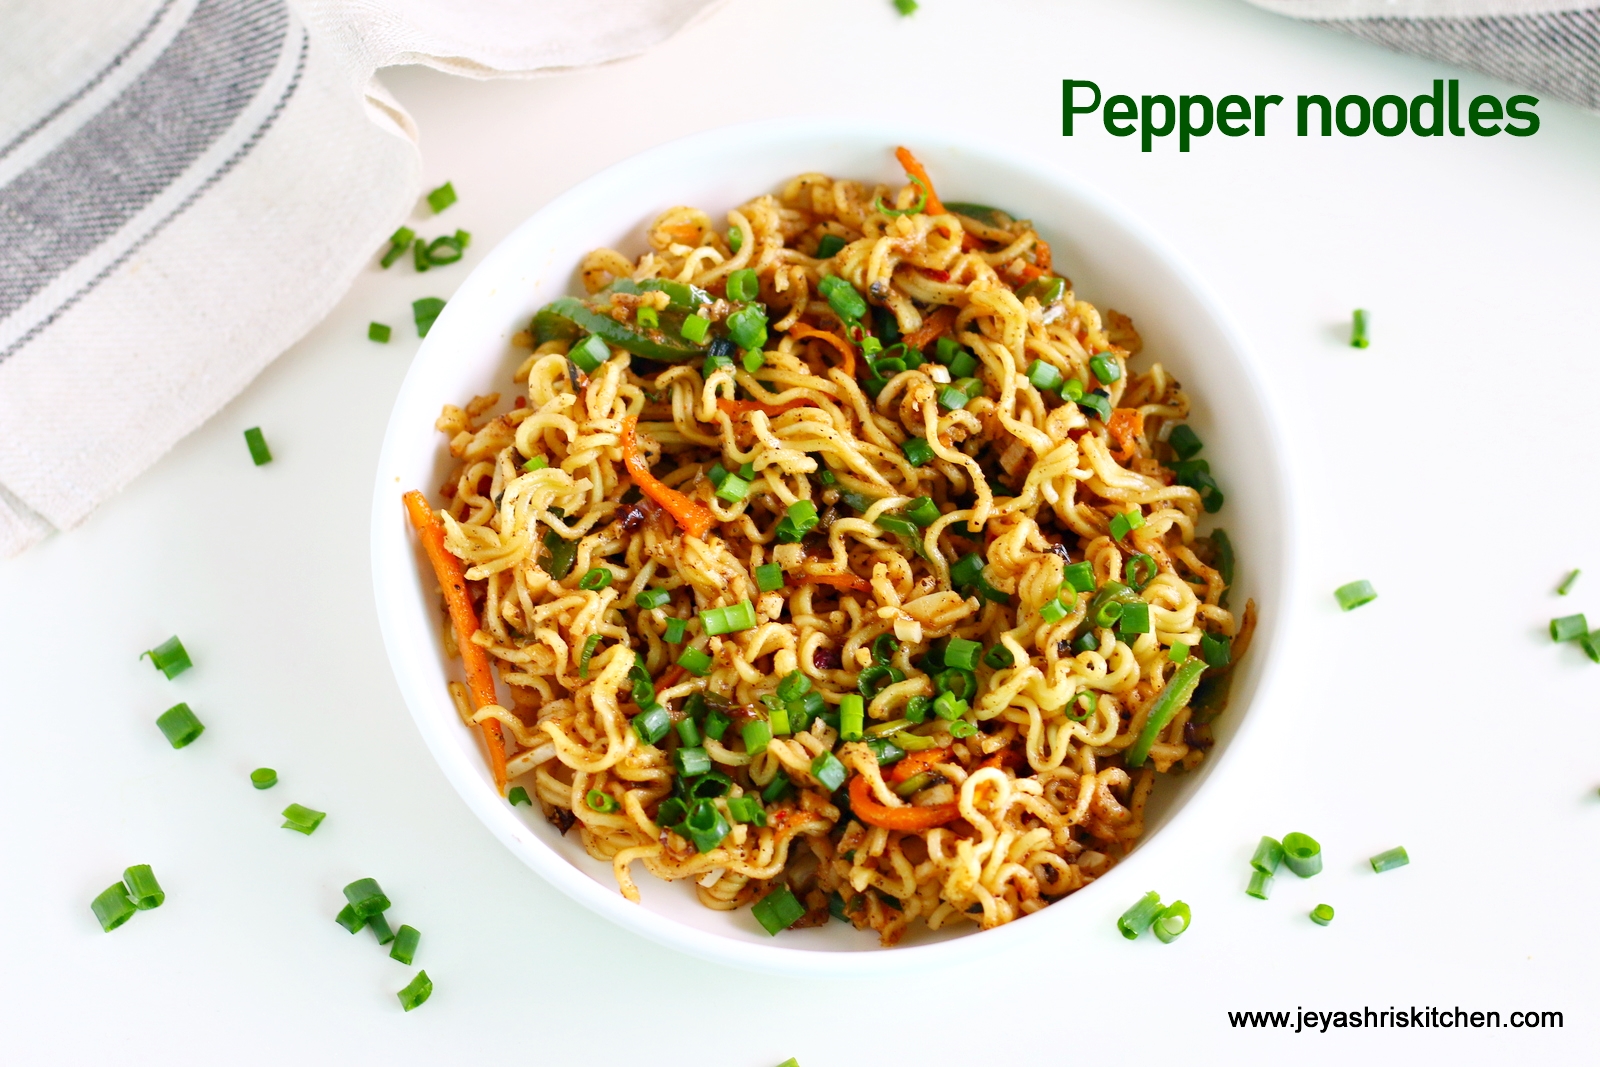 Spicy pepper noodles